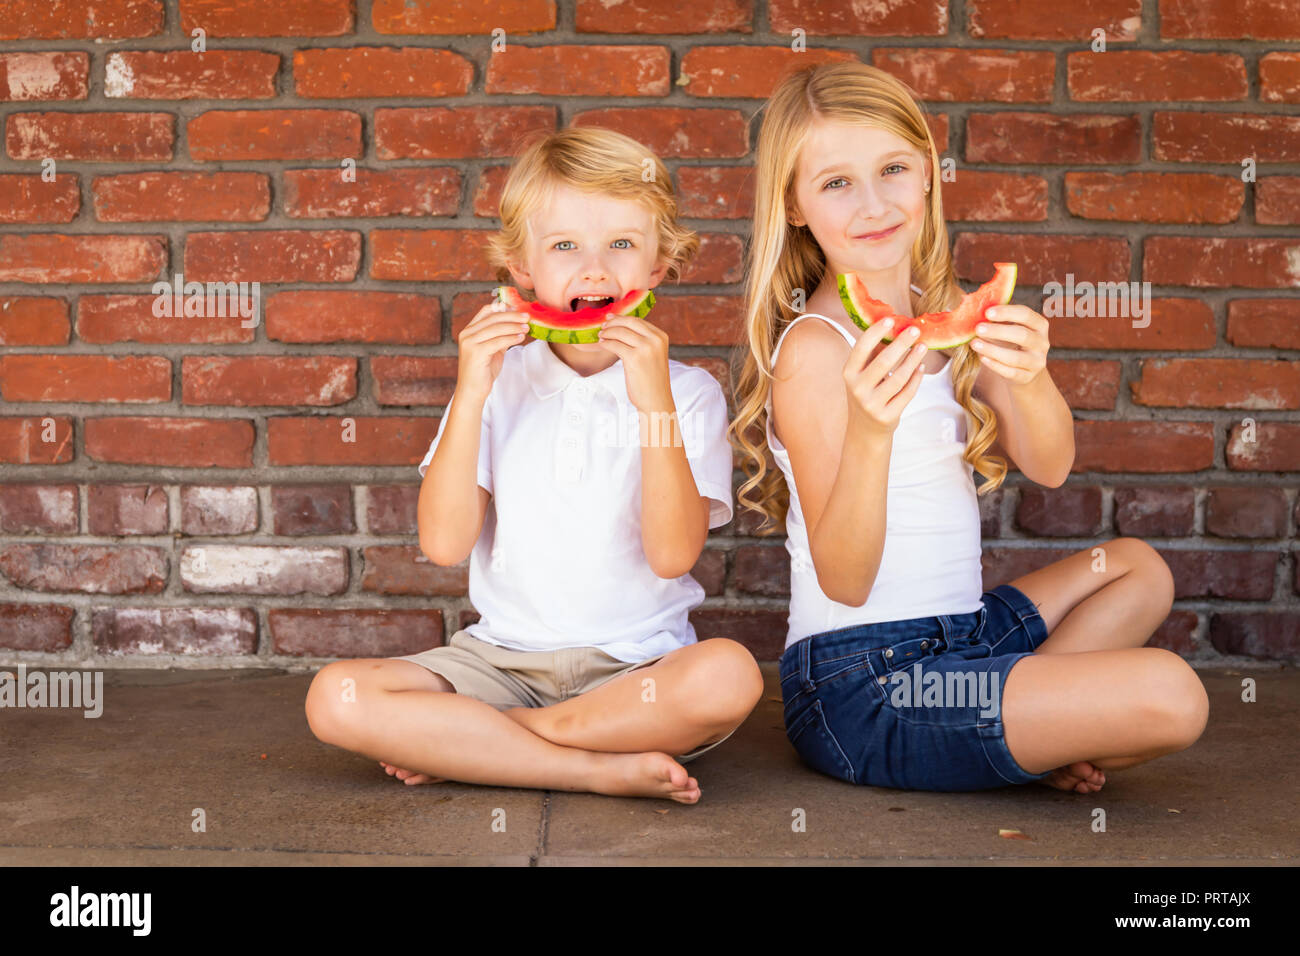 Cute Young Cuacasian Boy and Girl Eating Watermelon Against Brick Wall. Stock Photo